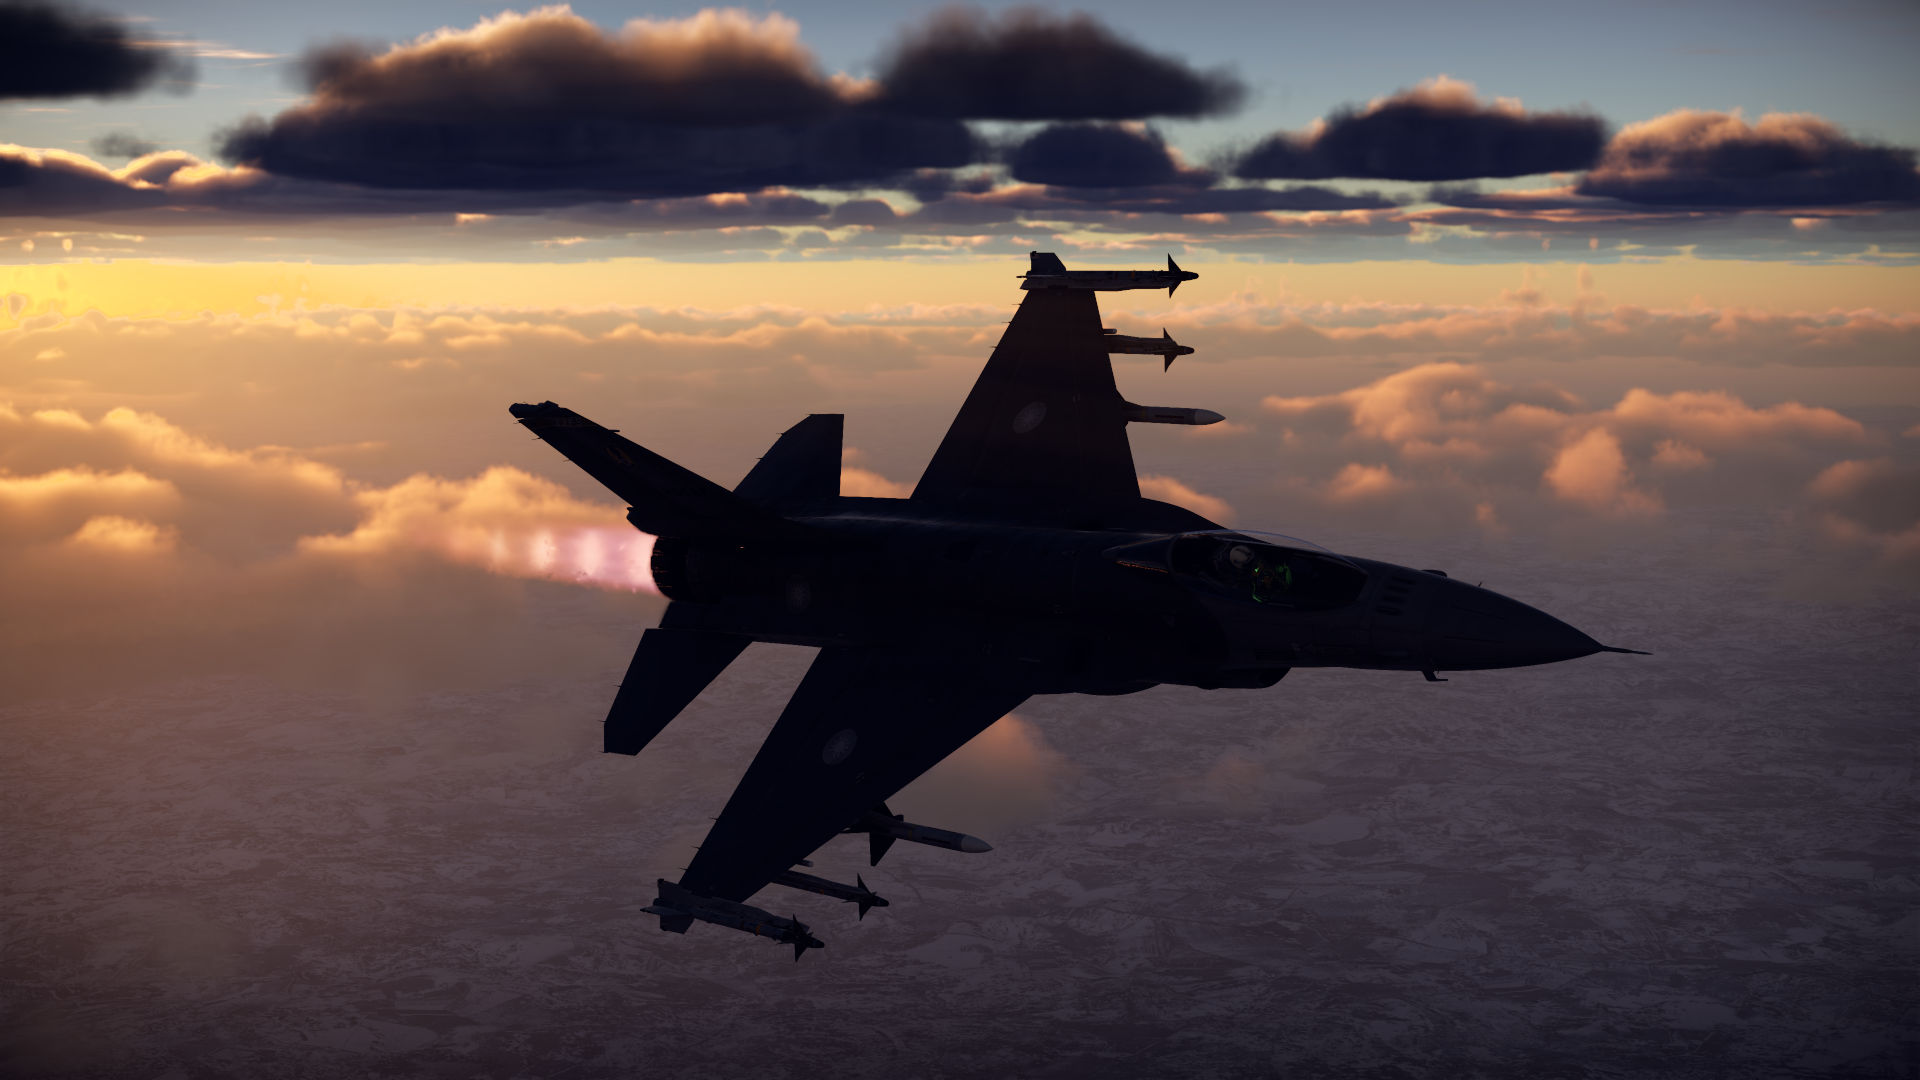 War Thunder General Dynamics F 16 Fighting Falcon Taiwanese Air Force Jet Fighter Planes Sunset Vide 1920x1080